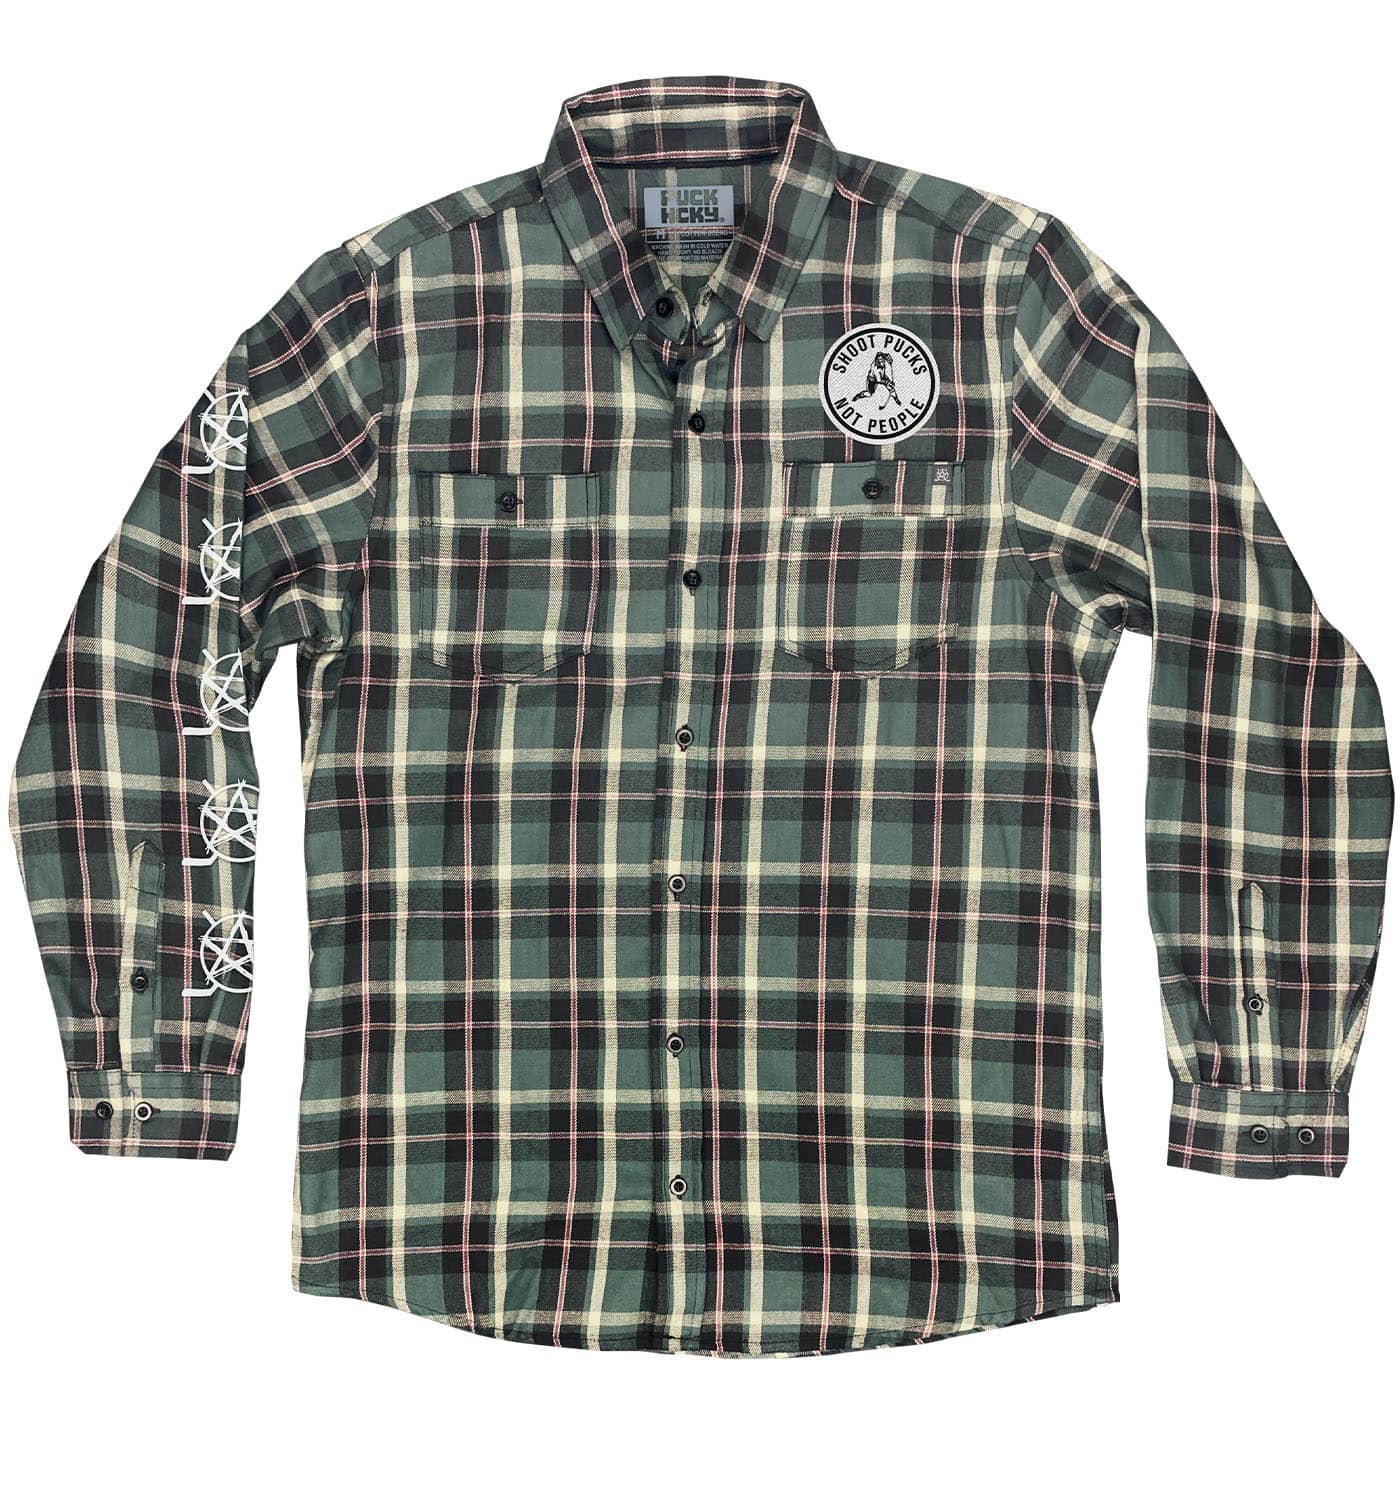 PUCK HCKY 'BIG SKATE' lightweight hockey flannel in grey and ecru plaid front view